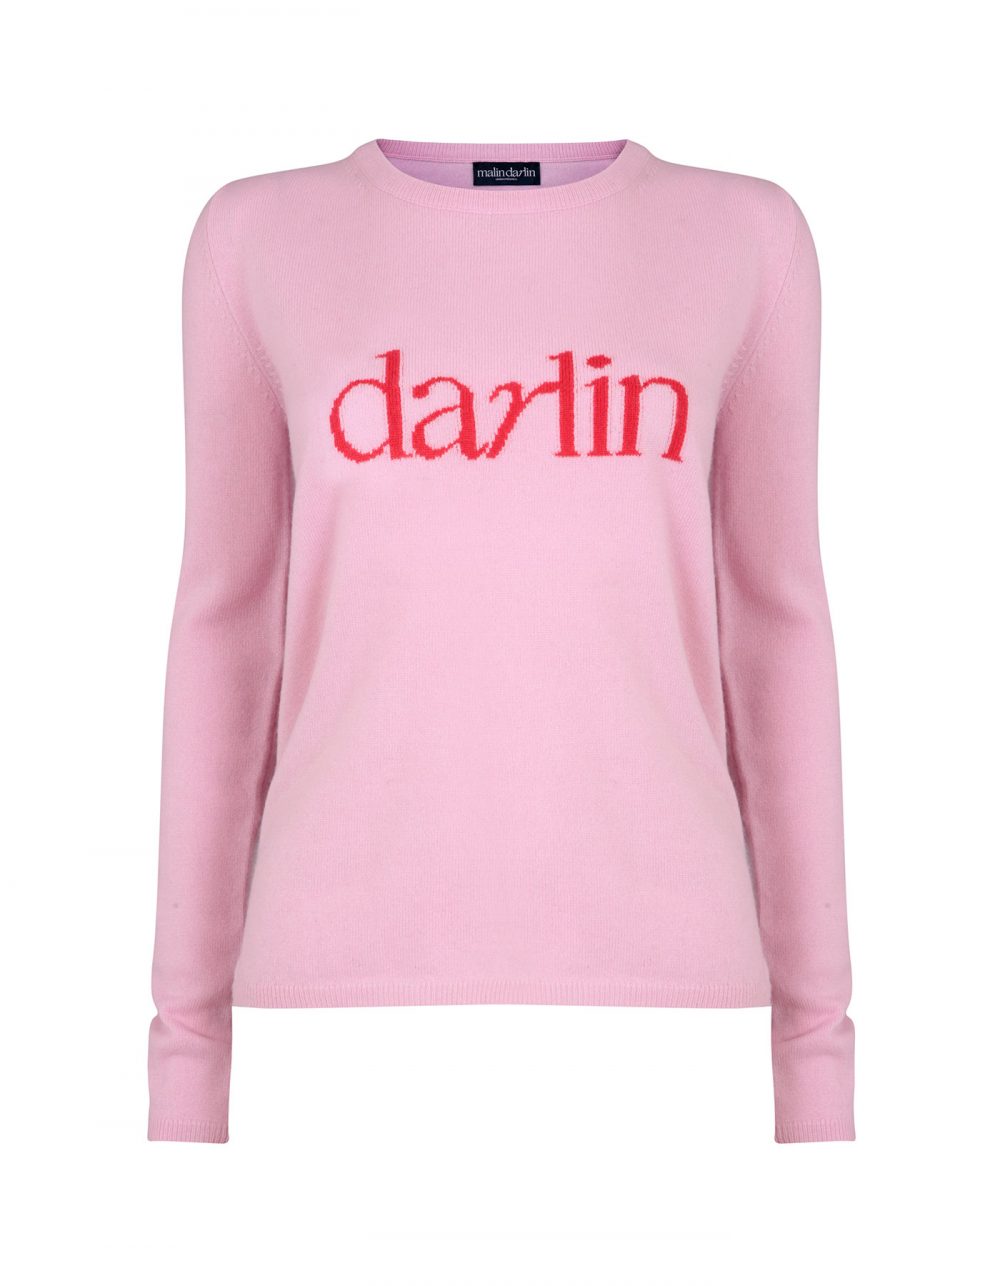 Photo of the malin darlin Darlin Pink designer cashmere jumper isolated on white.